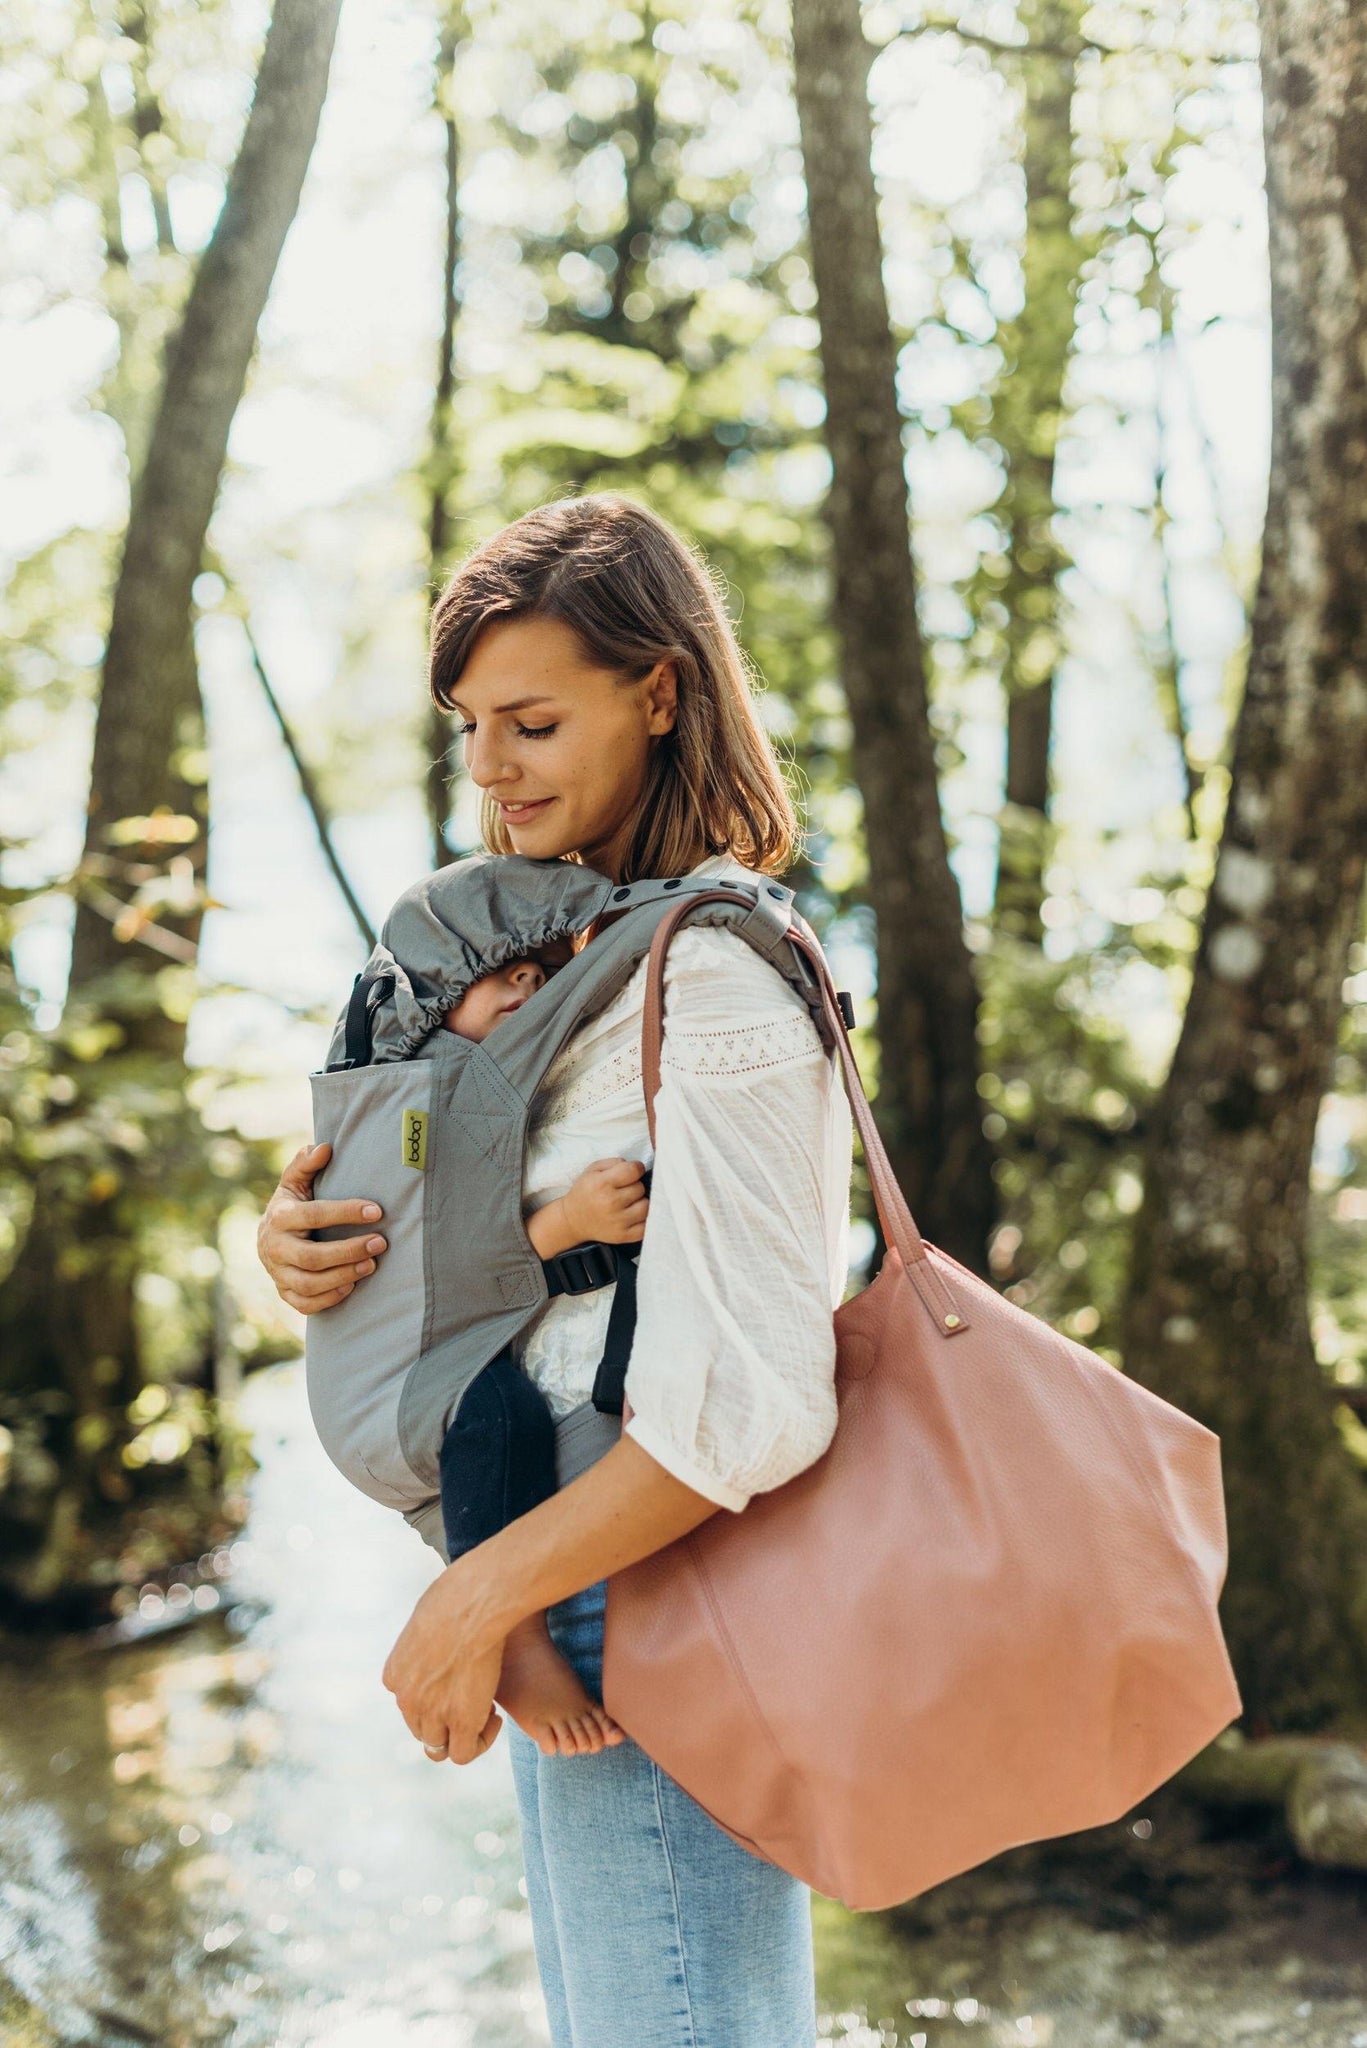 Boba classic baby carrier Dusk. Our streamlined soft structured baby carrier is designed to go and grow with your little one. This ergonomic front facing baby carrier is ready to use from infant to toddler.